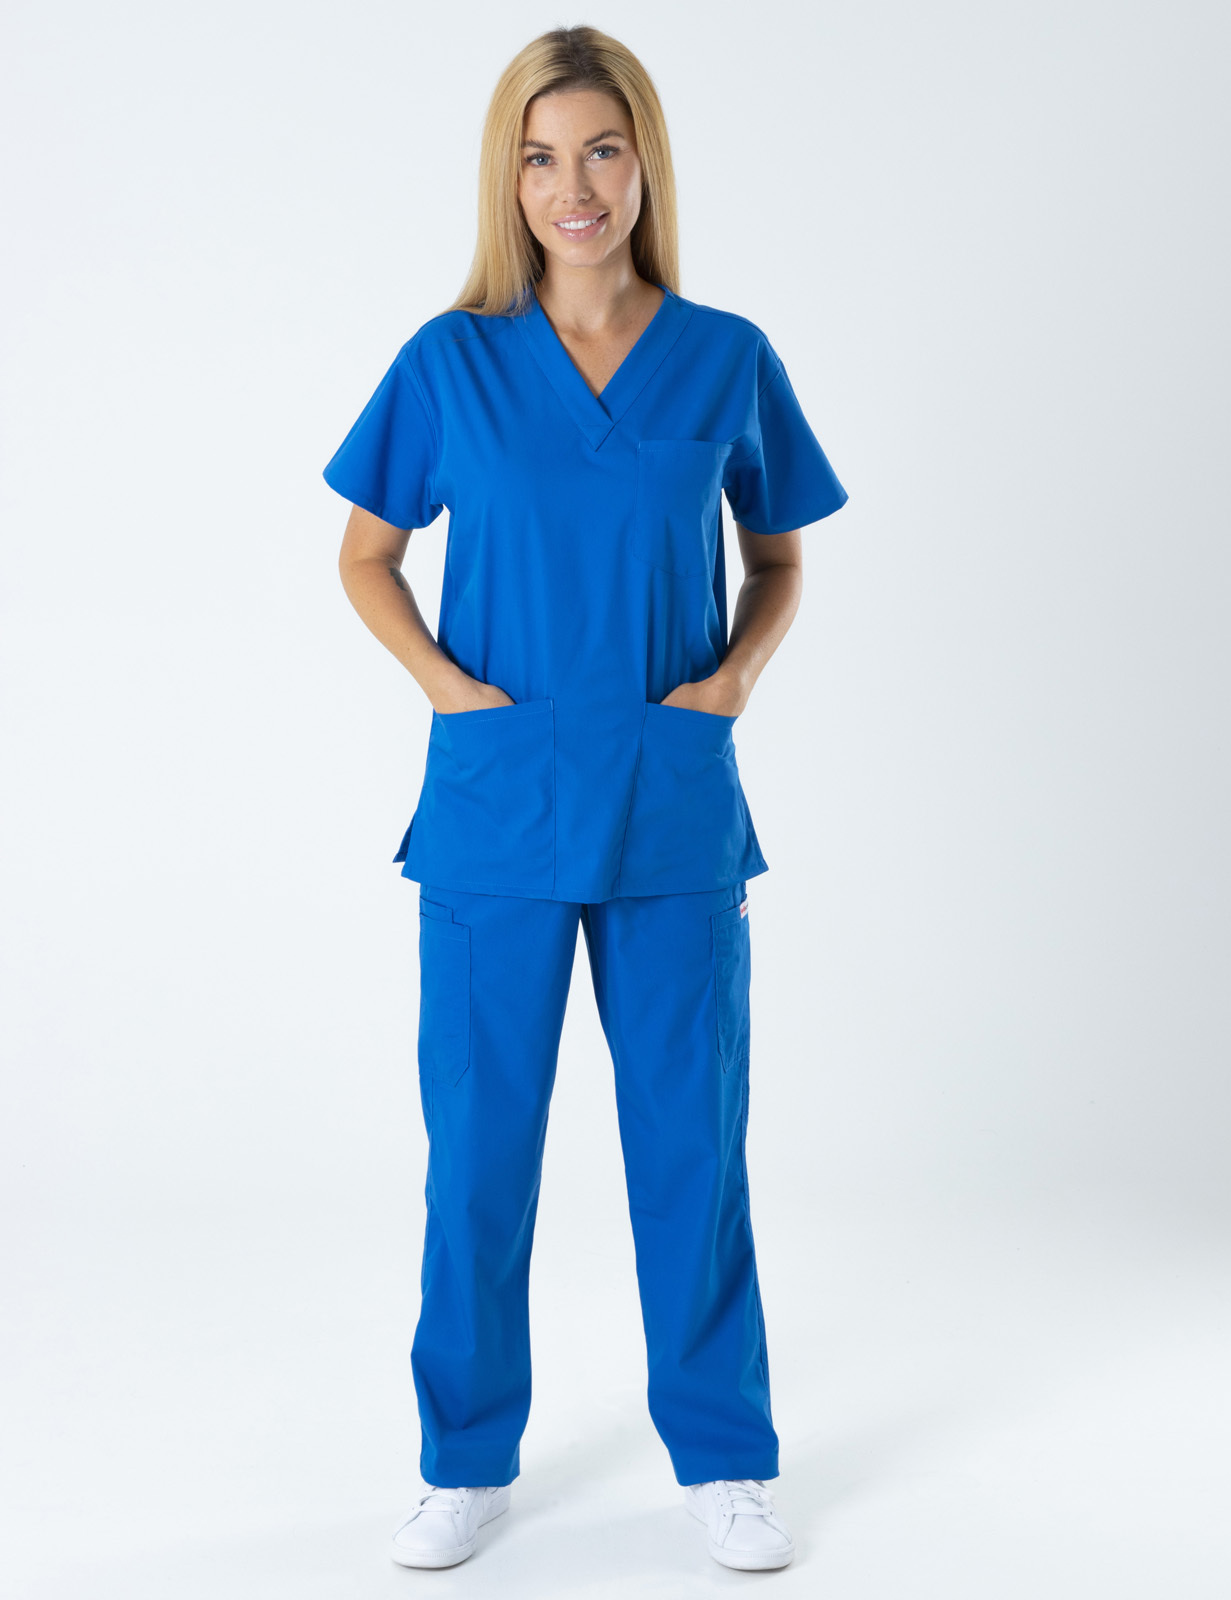 Canberra Hospital - Cardiology Cardiac Technical Officer (4 Pocket Scrub Top and Cargo Pants in Royal incl Logos)